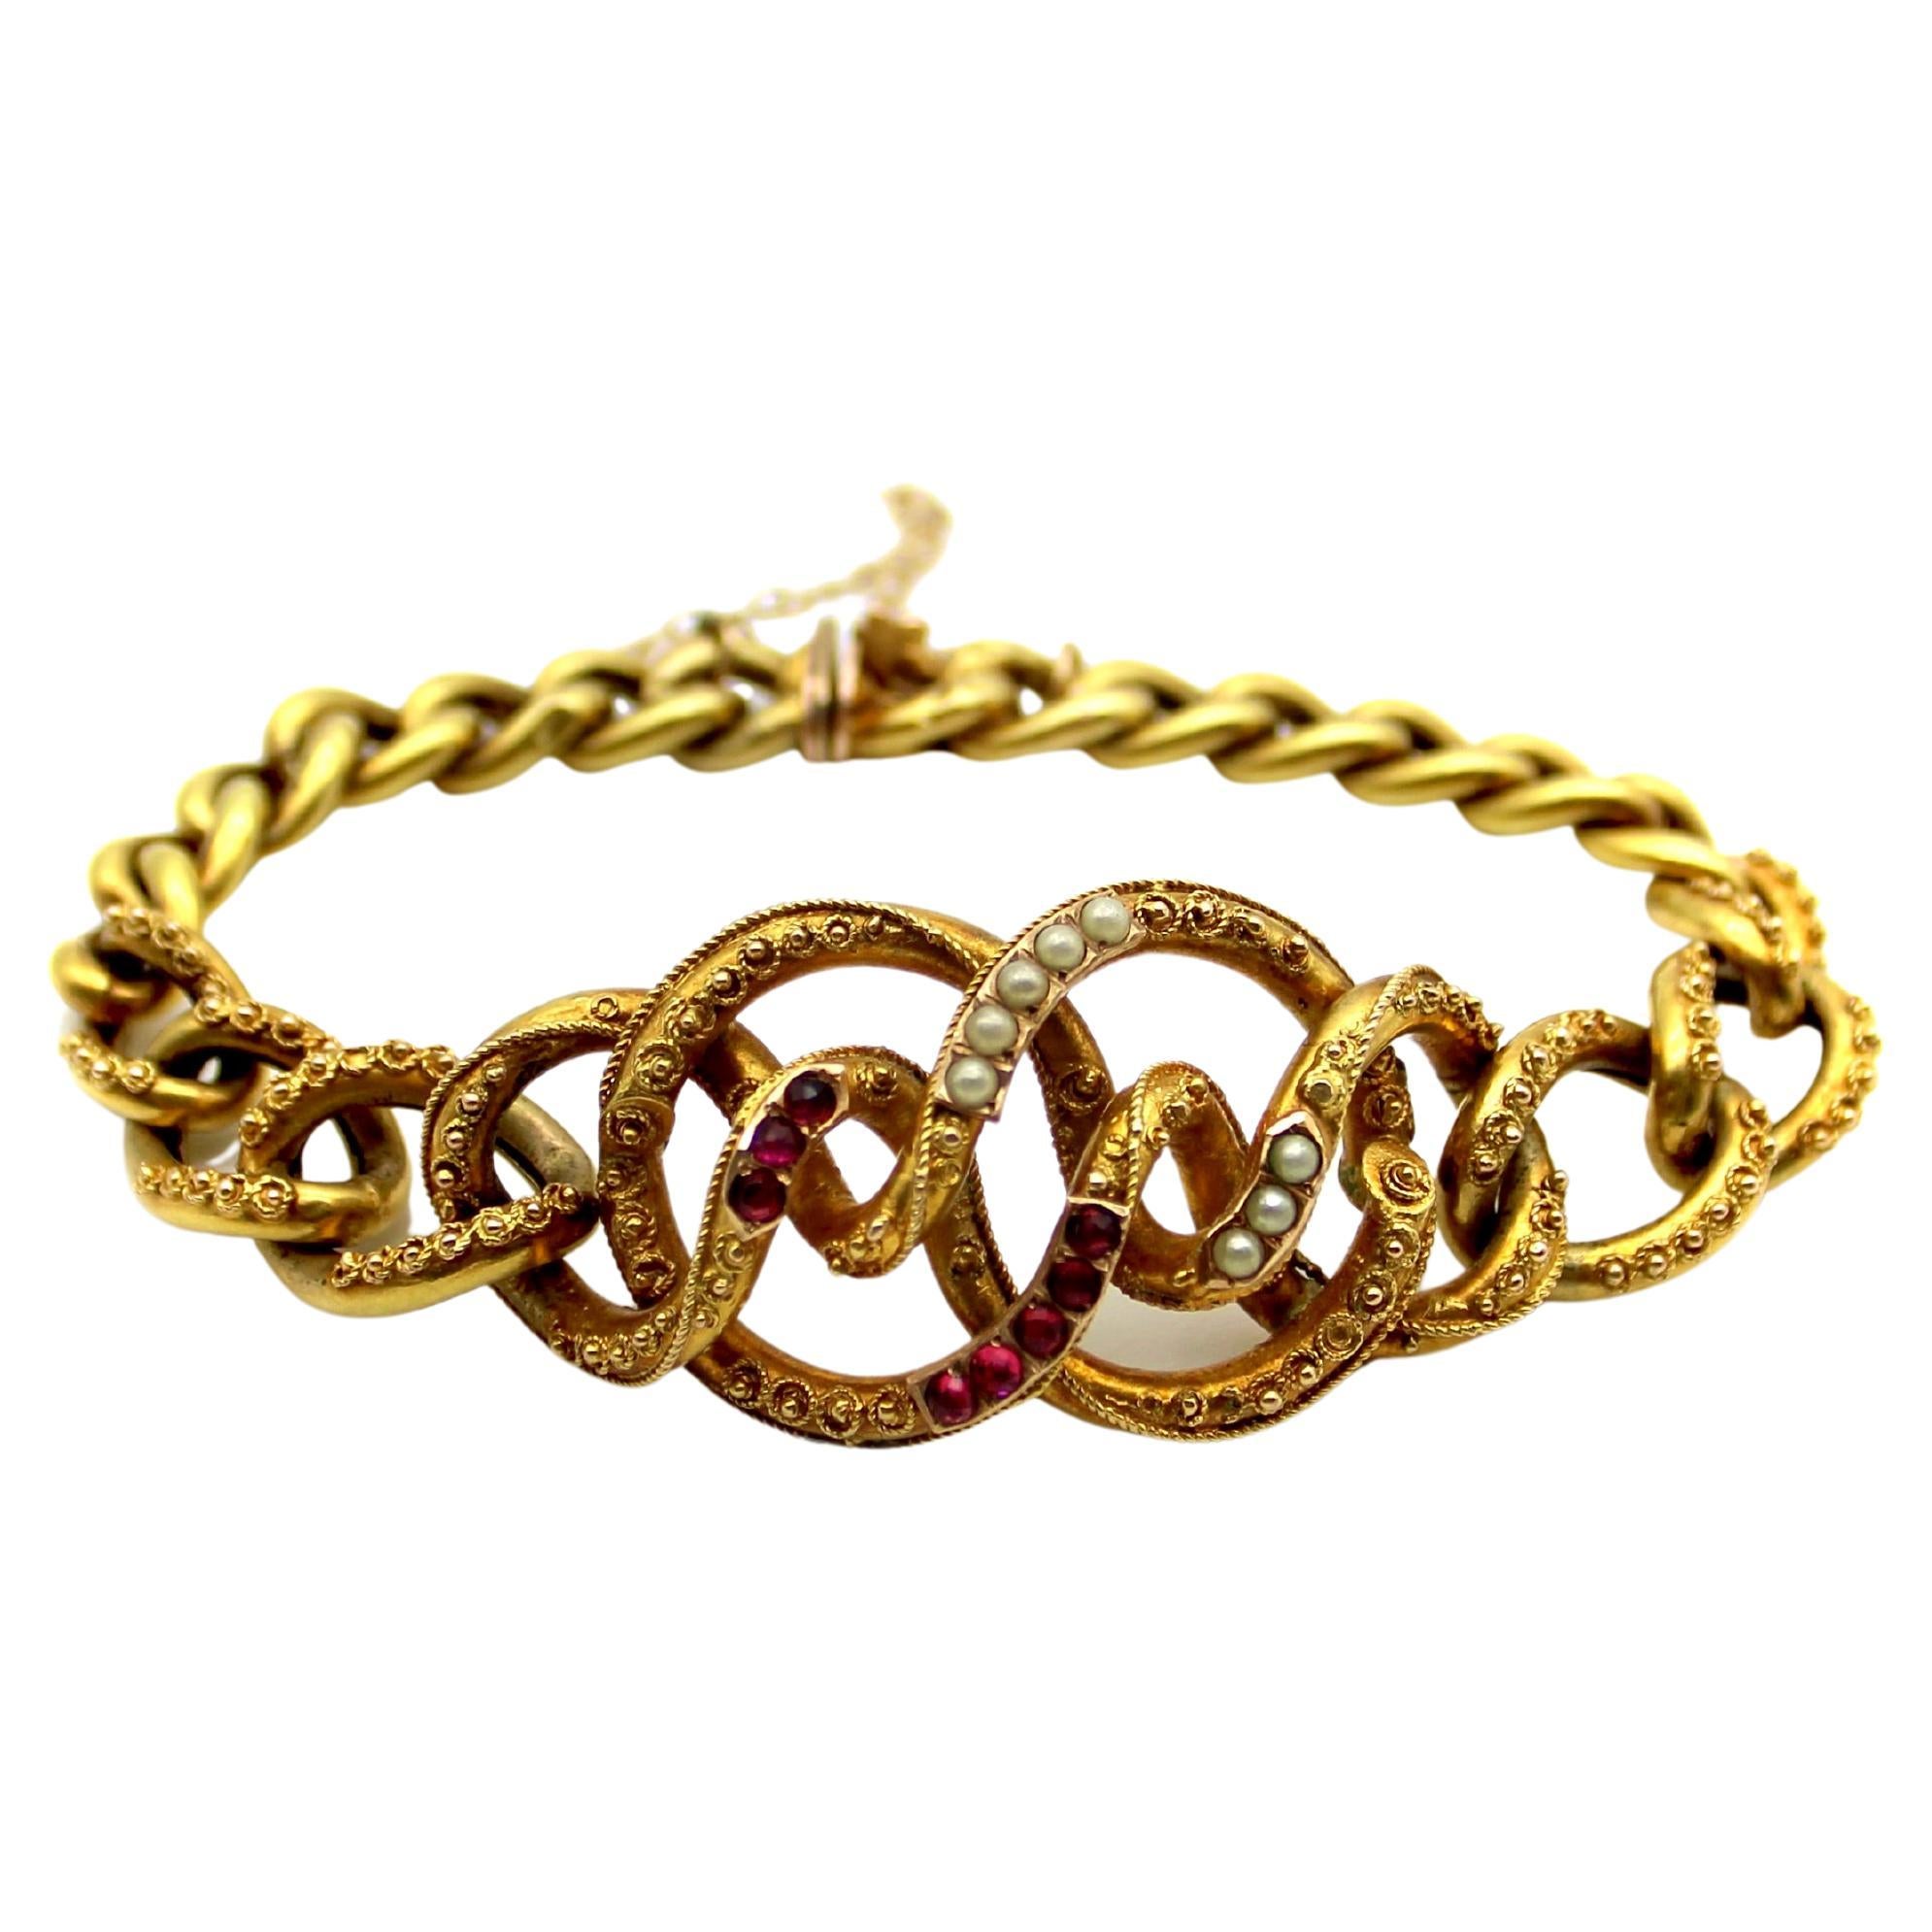 14K Gold Etruscan Revival Lover’s Knot Bracelet with Garnets and Pearls For Sale